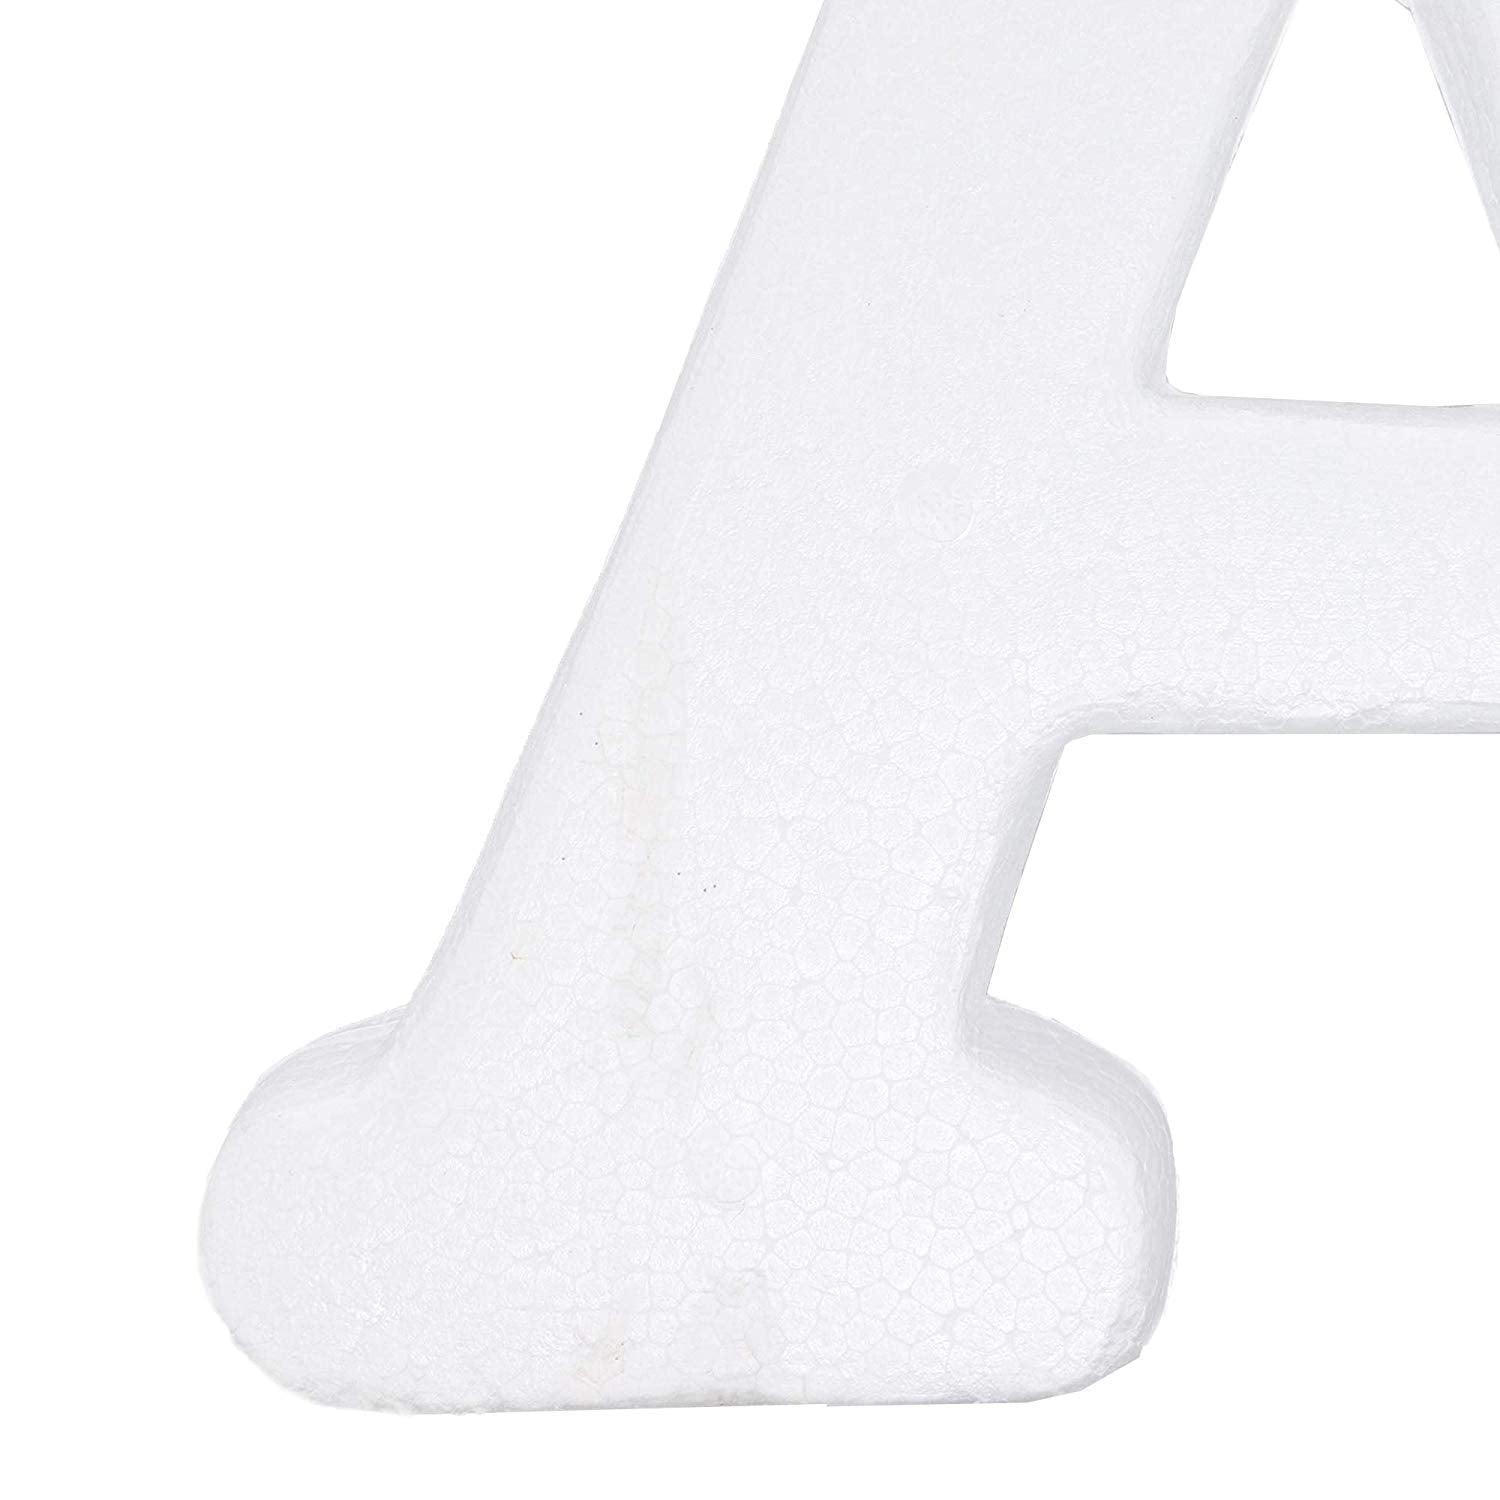 12 inch Smooth Foam Letters - Great for Arts and Craft & DIY (Q)